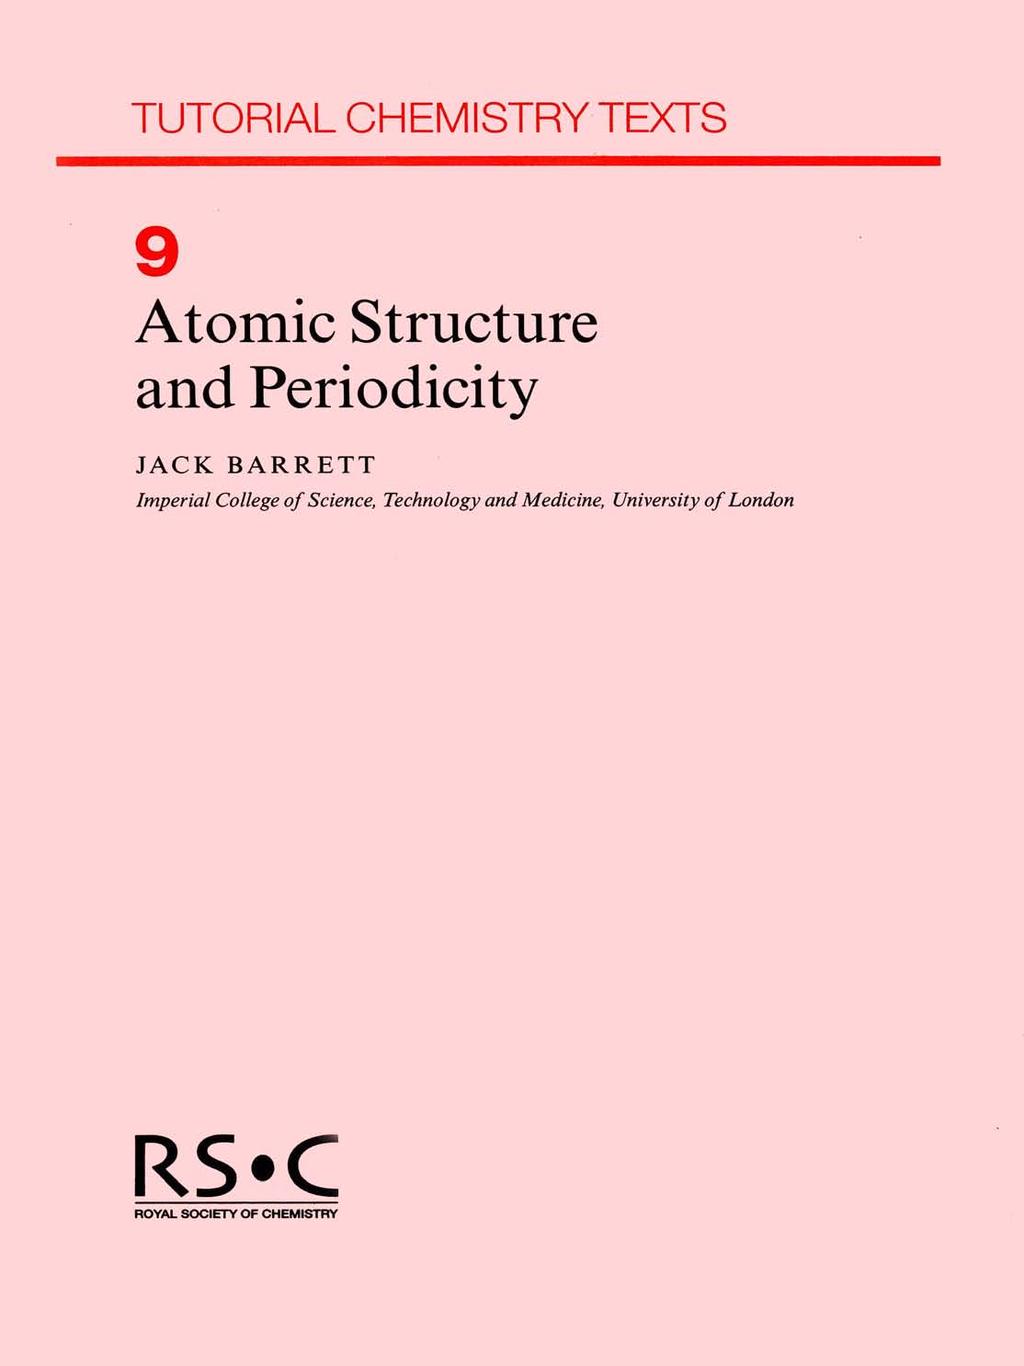 TUTORIAL CHEMISTRY TEXTS 9 Atomic Structure and Periodicity JACK BARRETT Imperial